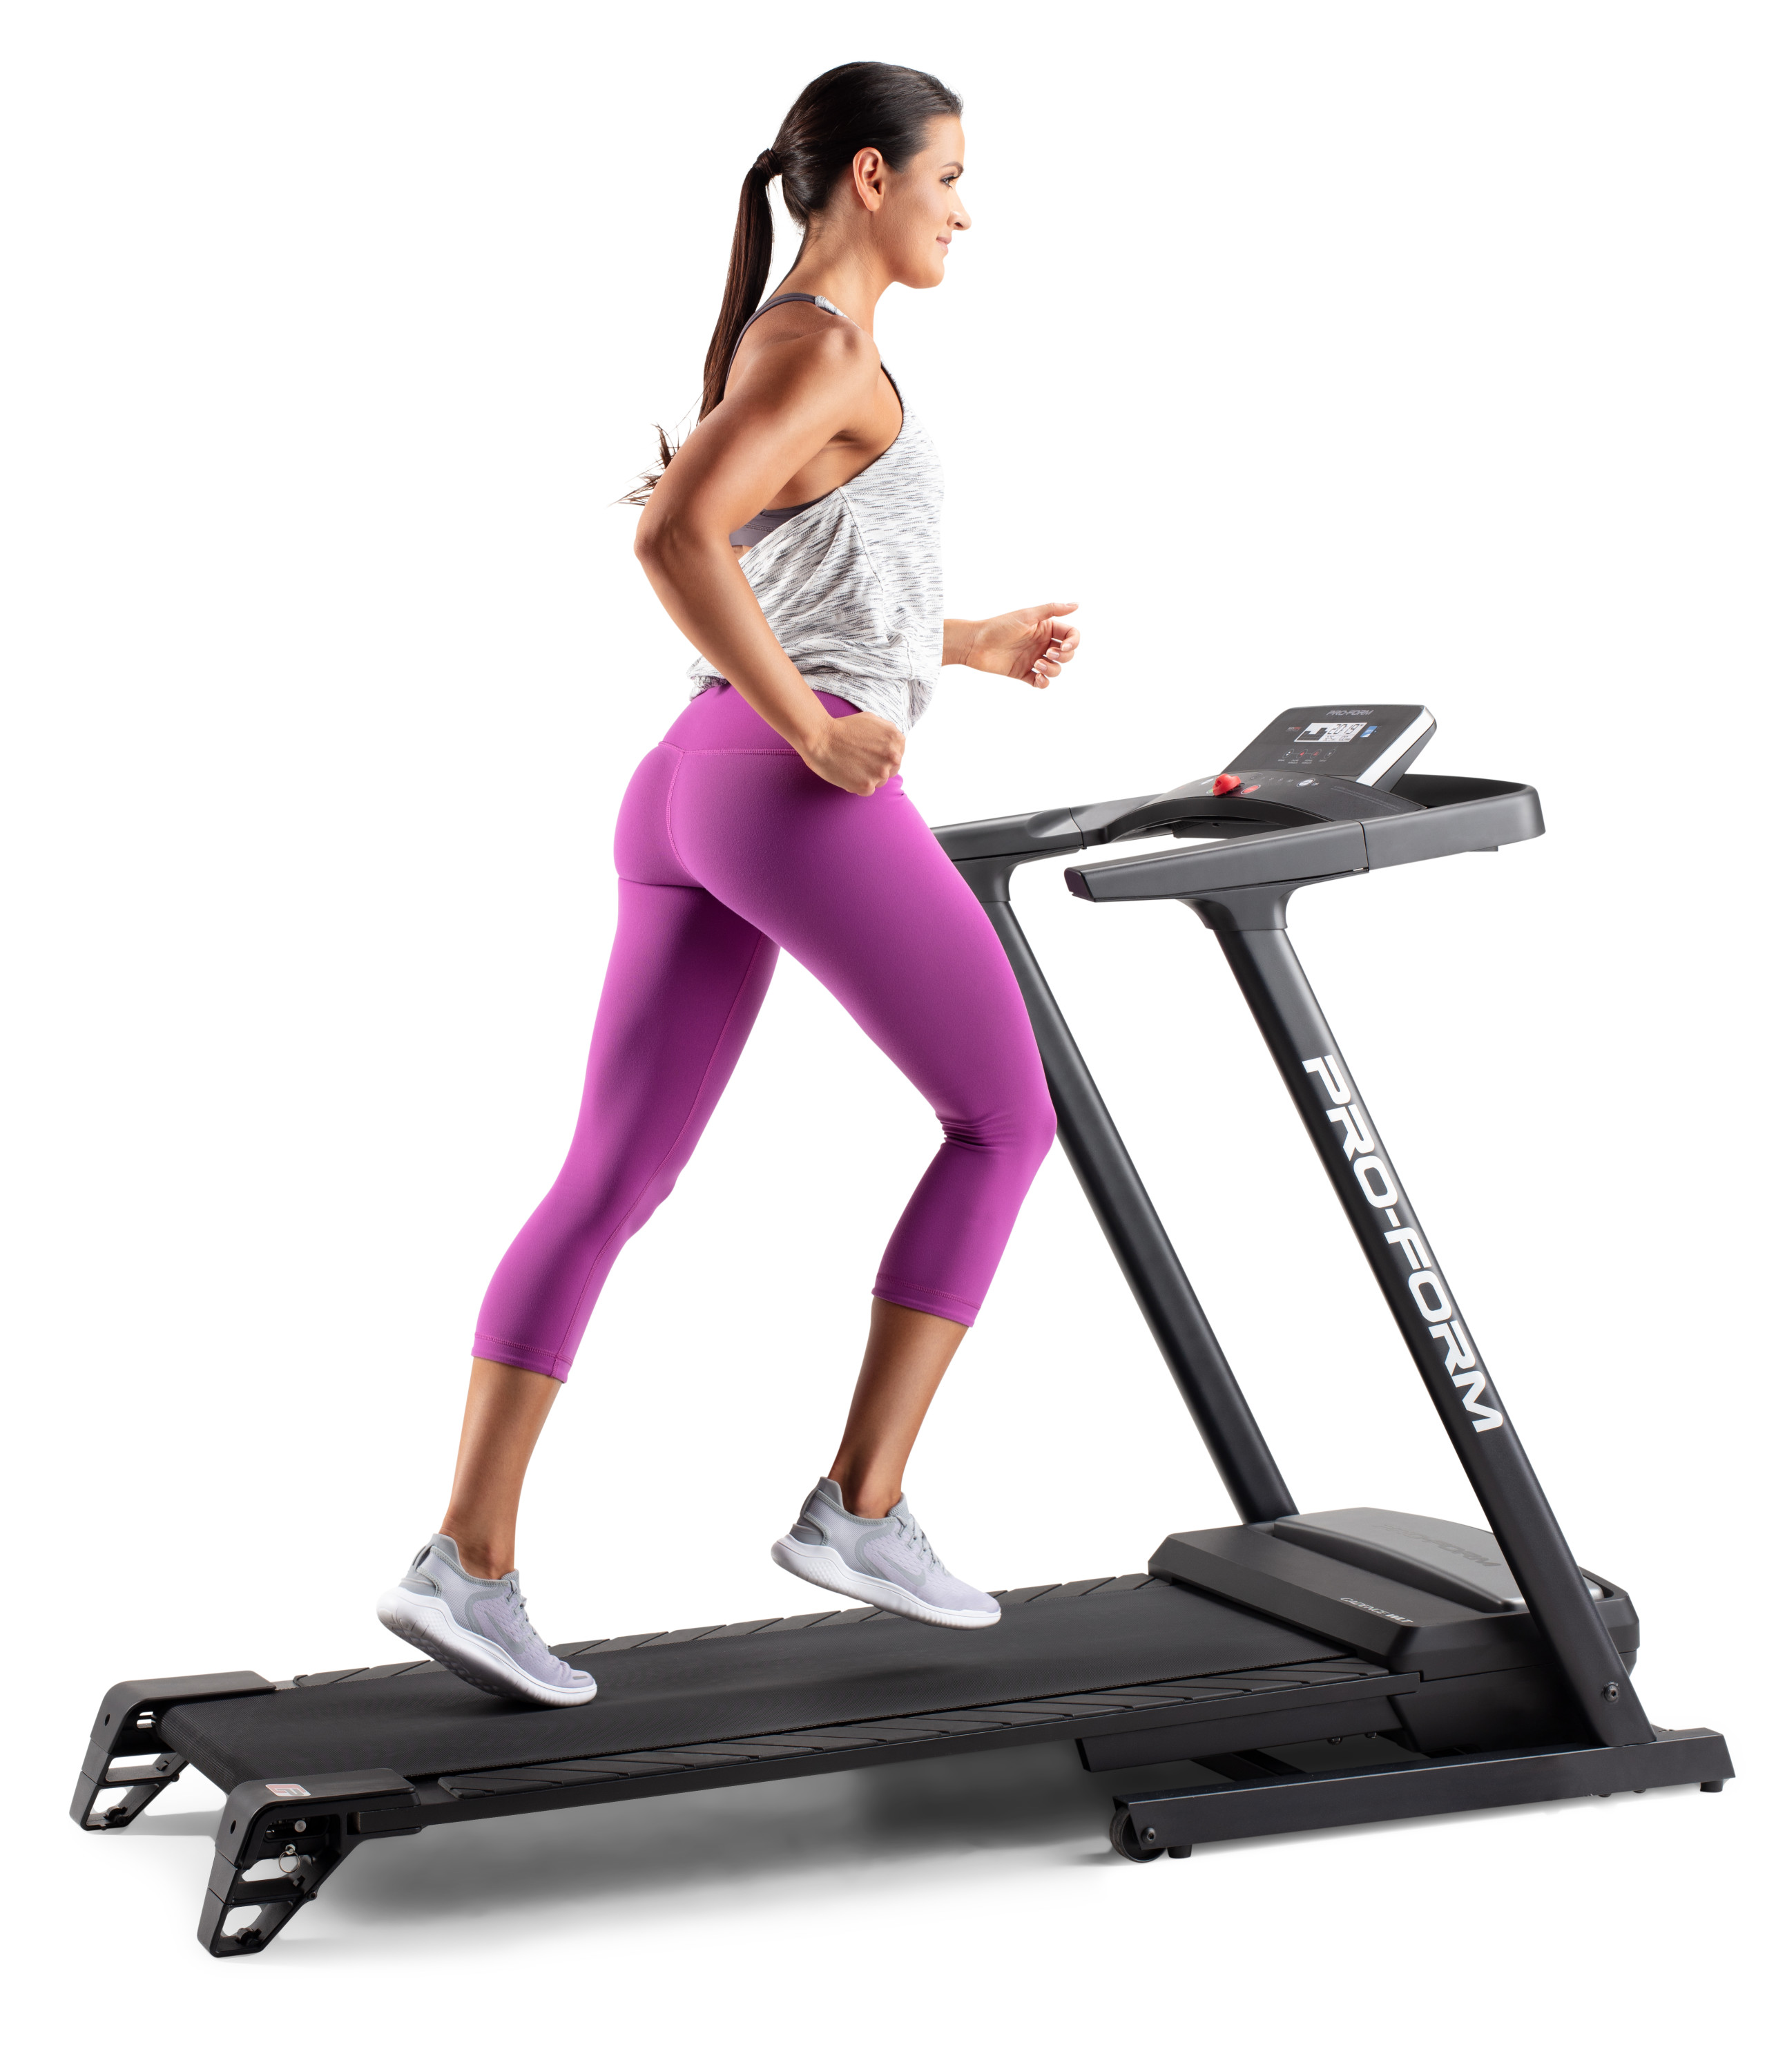 ProForm Cadence WLT Folding Treadmill with Reflex Deck for Walking and Jogging, iFit Bluetooth Enabled - image 24 of 31